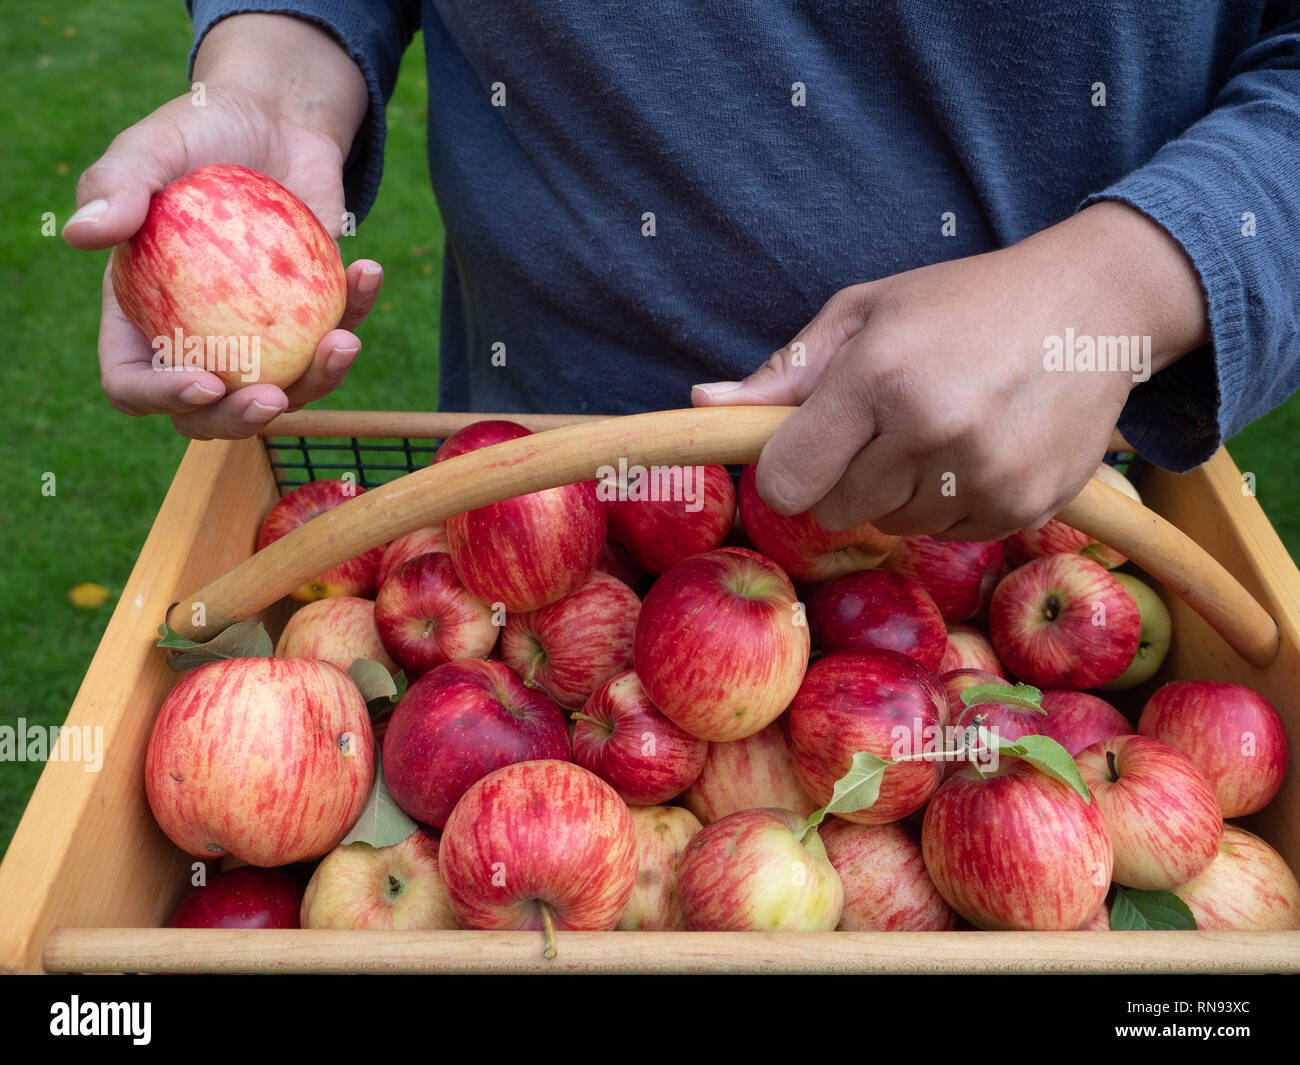 Woman holding a single apple in her right hand and a wood and wire basket full of freshly picked apples. Stock Photo